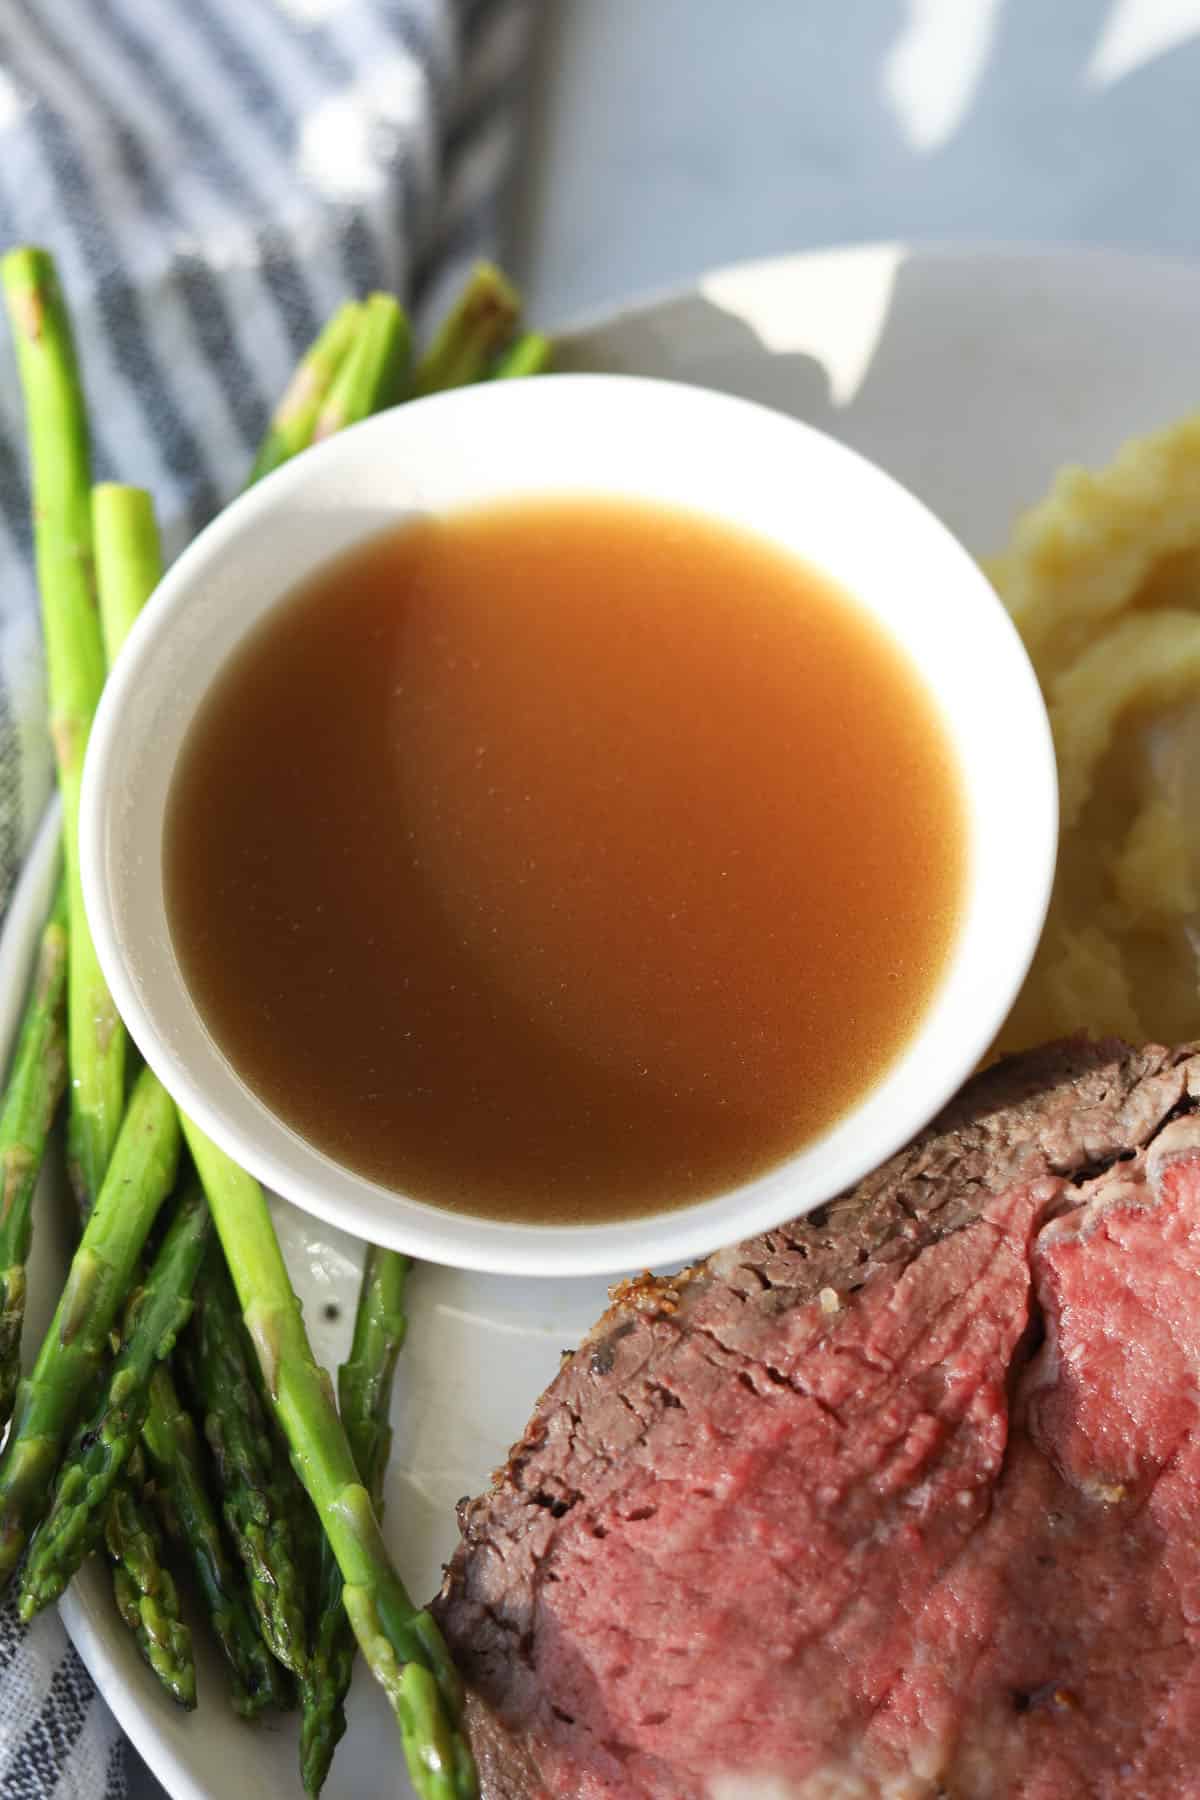 Bowl of au jus on plate.